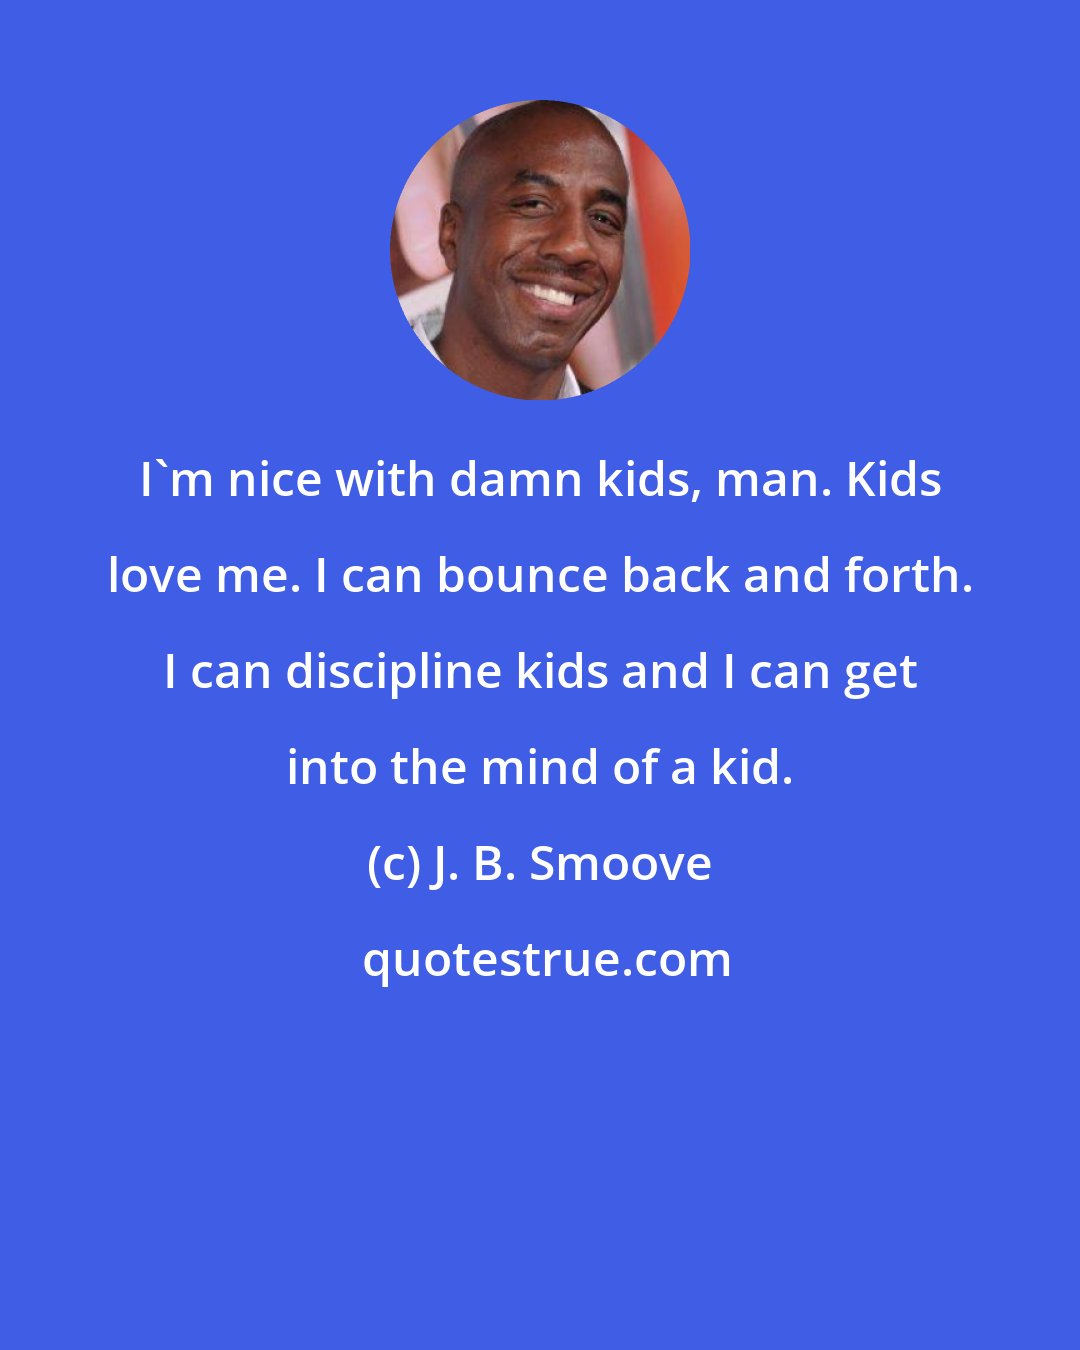 J. B. Smoove: I'm nice with damn kids, man. Kids love me. I can bounce back and forth. I can discipline kids and I can get into the mind of a kid.